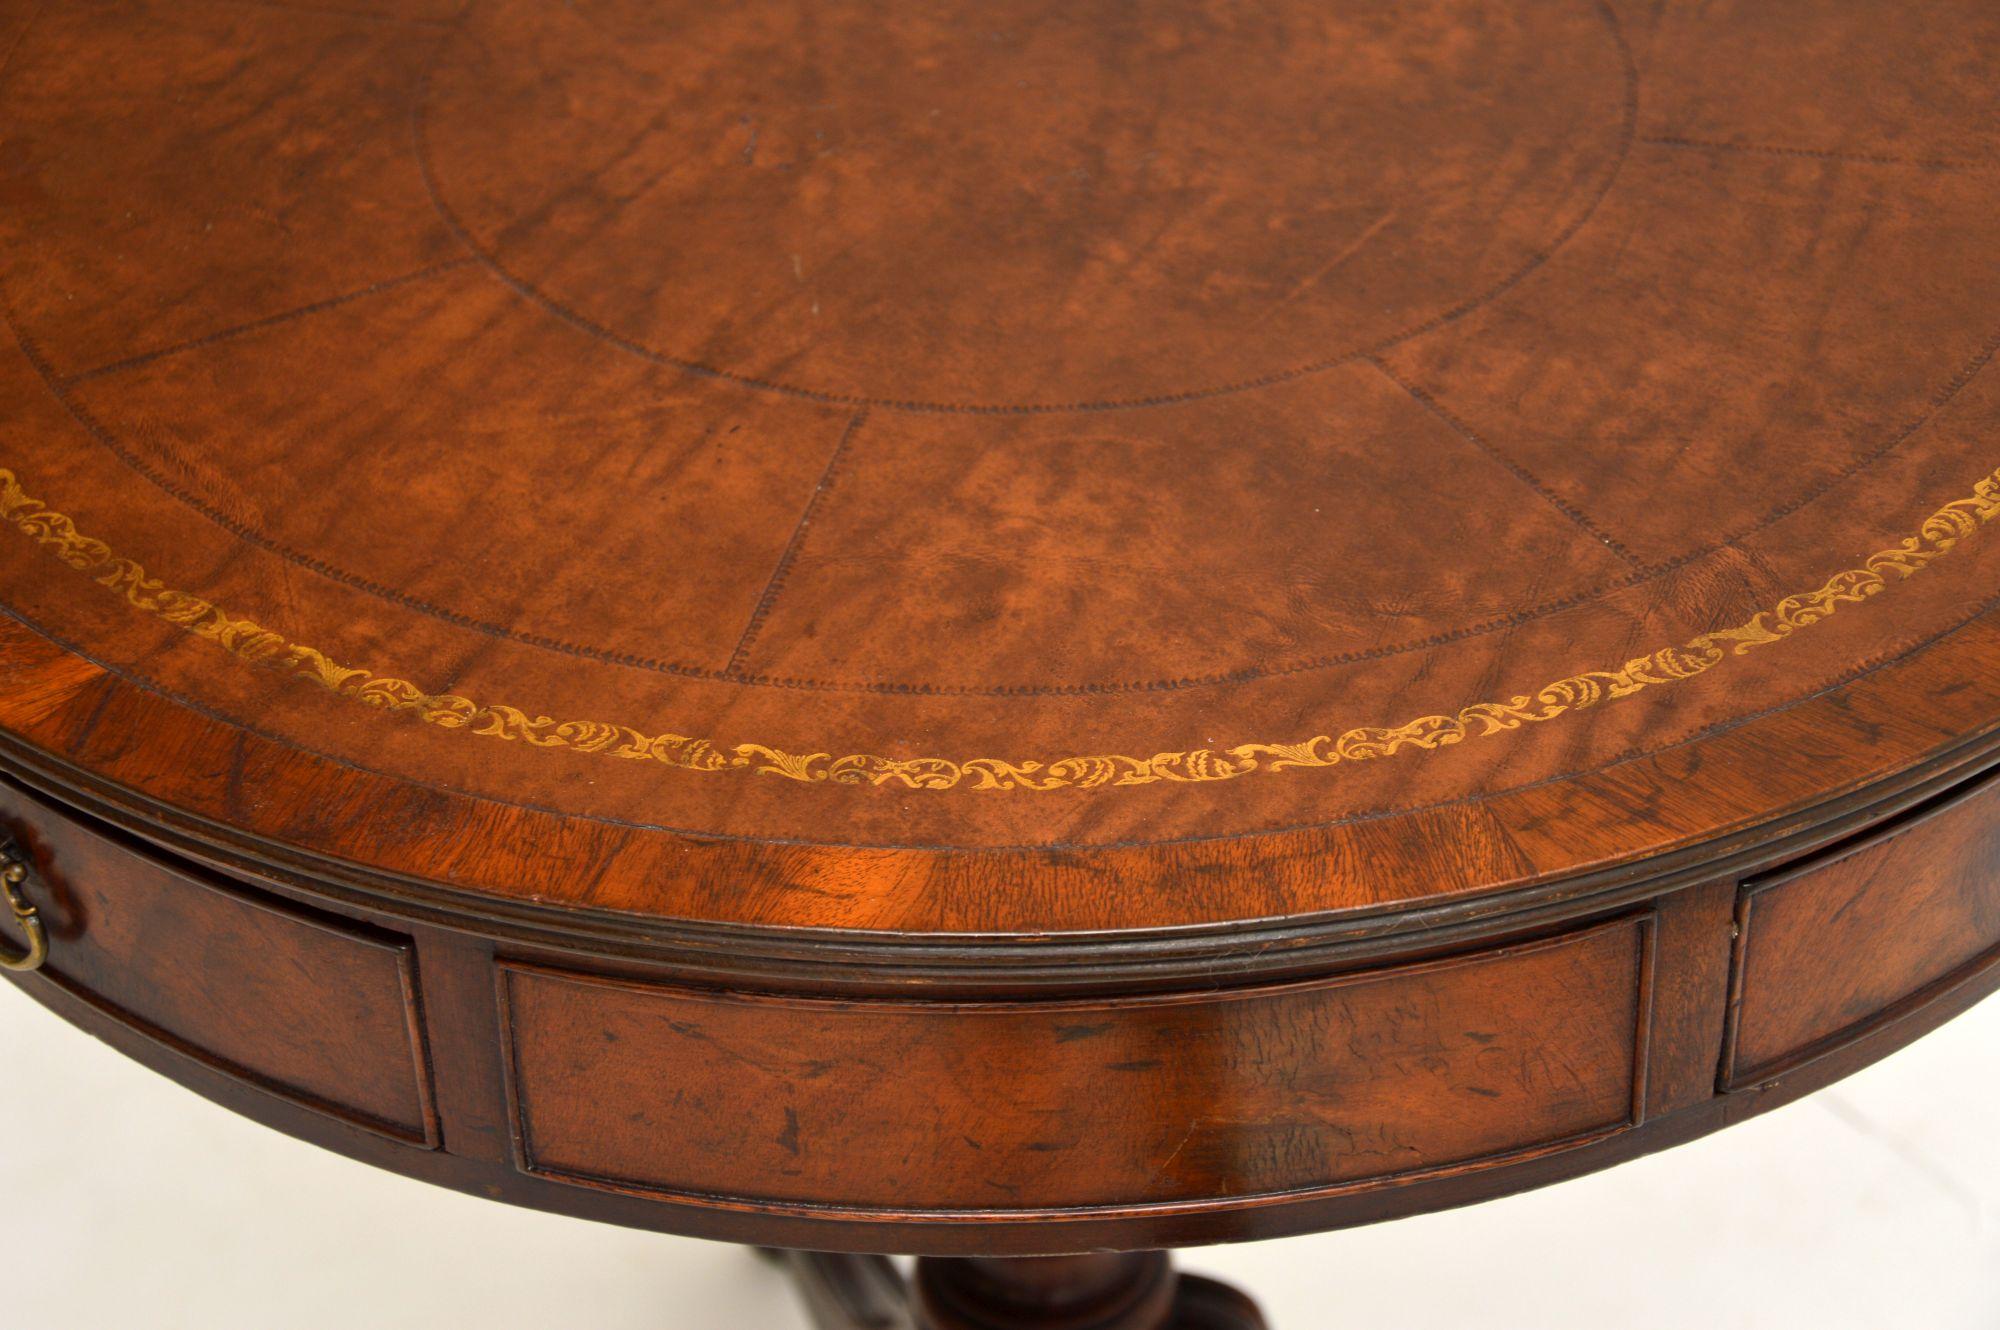 English Antique Mahogany Leather Top Revolving Drum Table